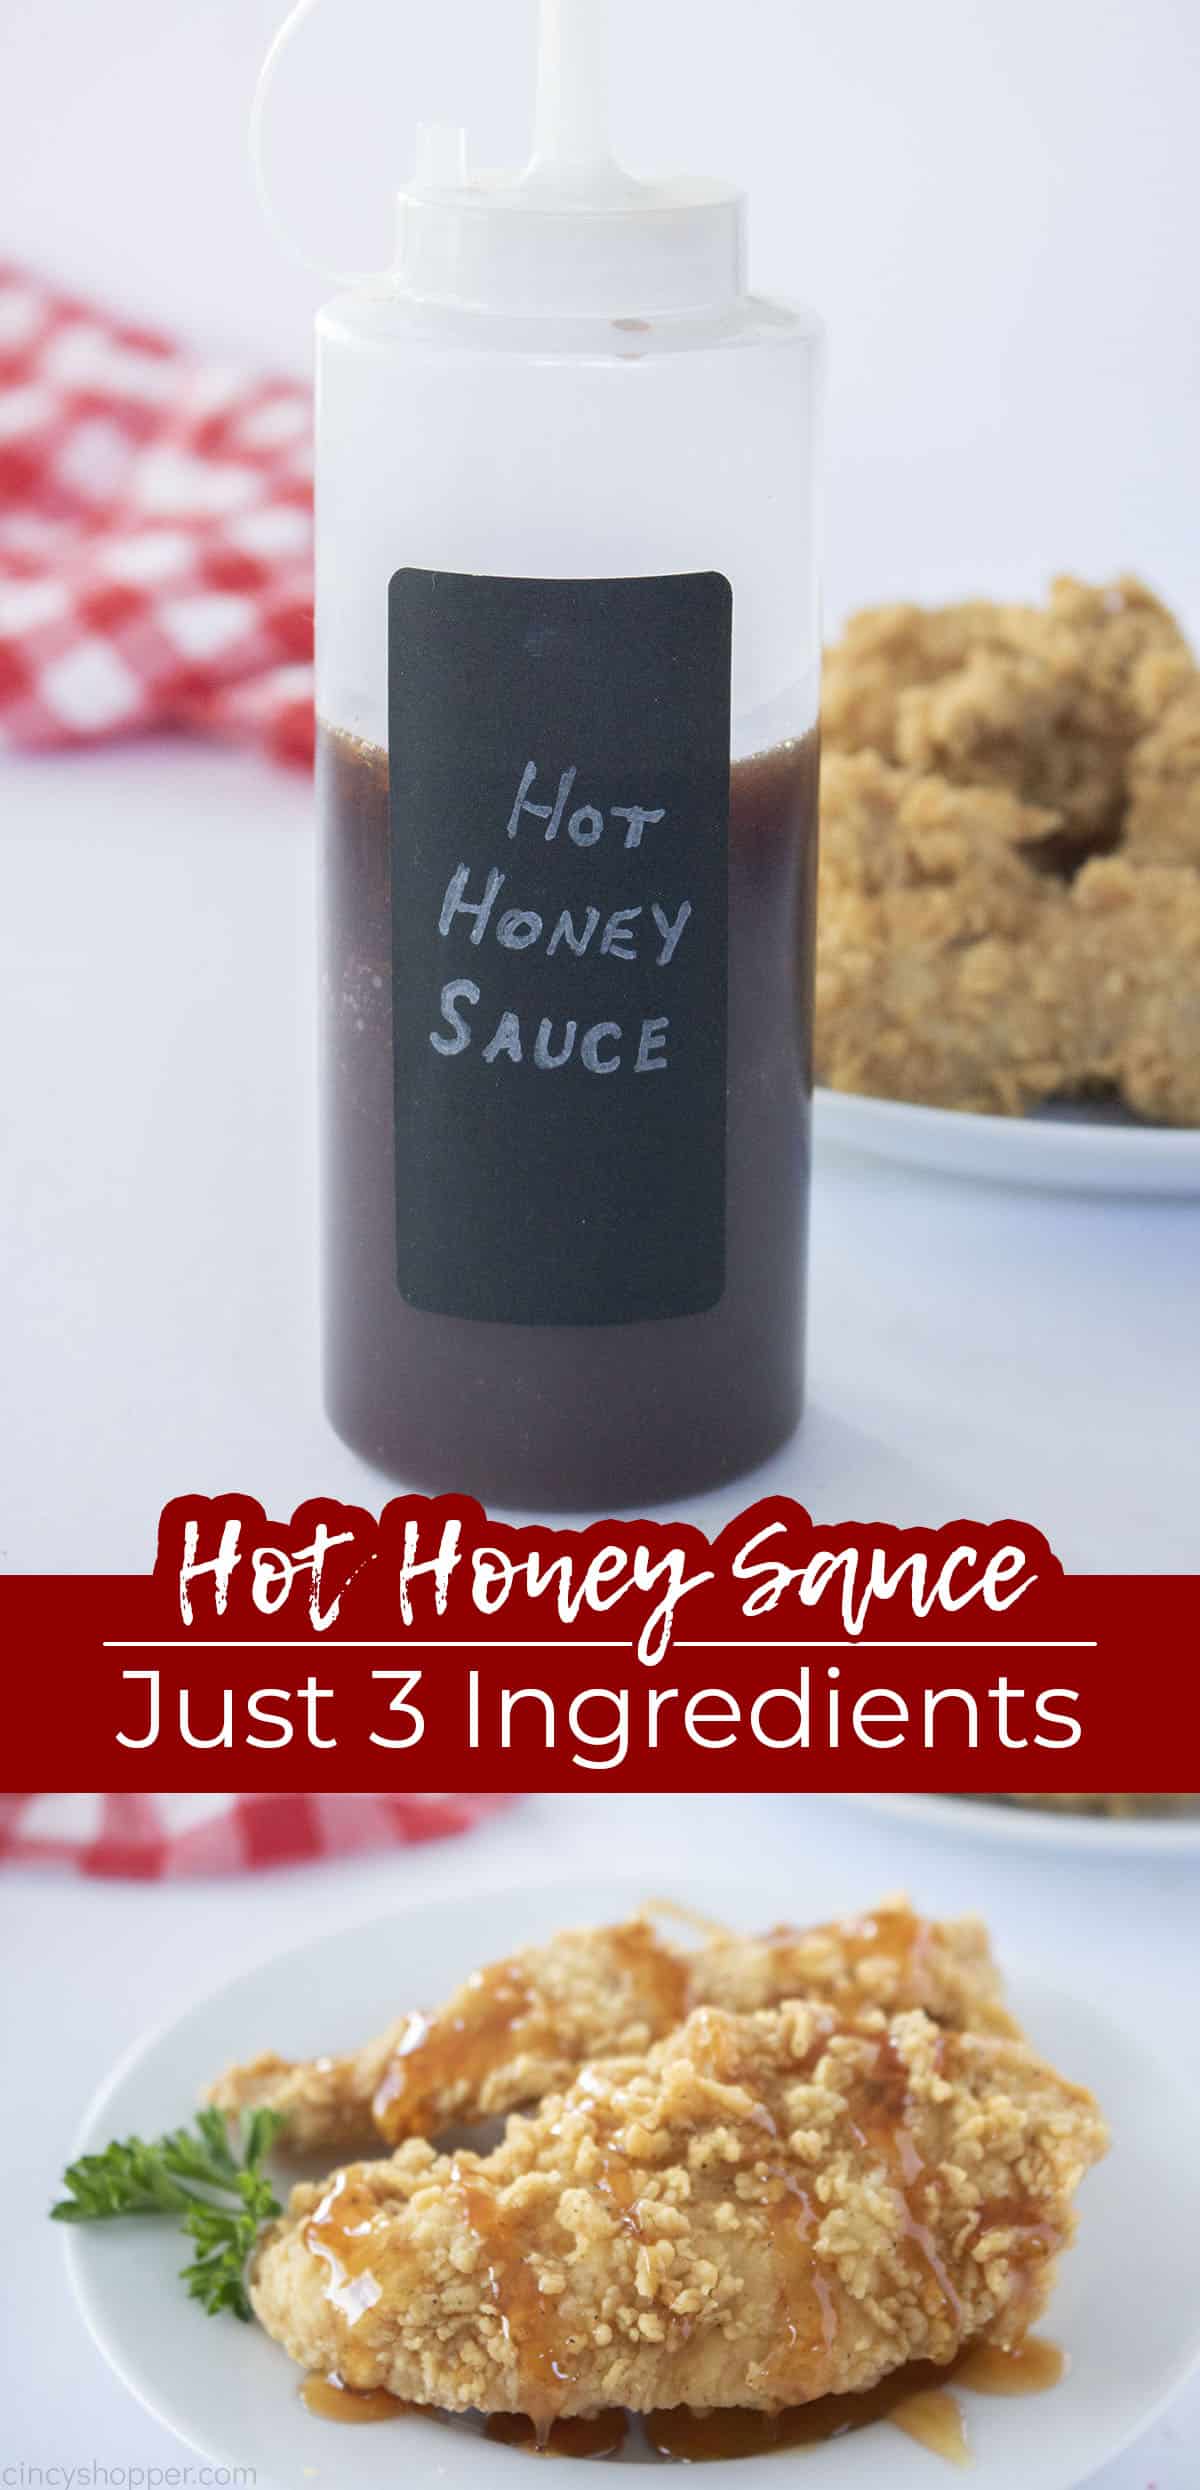 Long pin with chicken and squeeze bottle with text on image Hot Honey Sauce just 3 Ingredients.